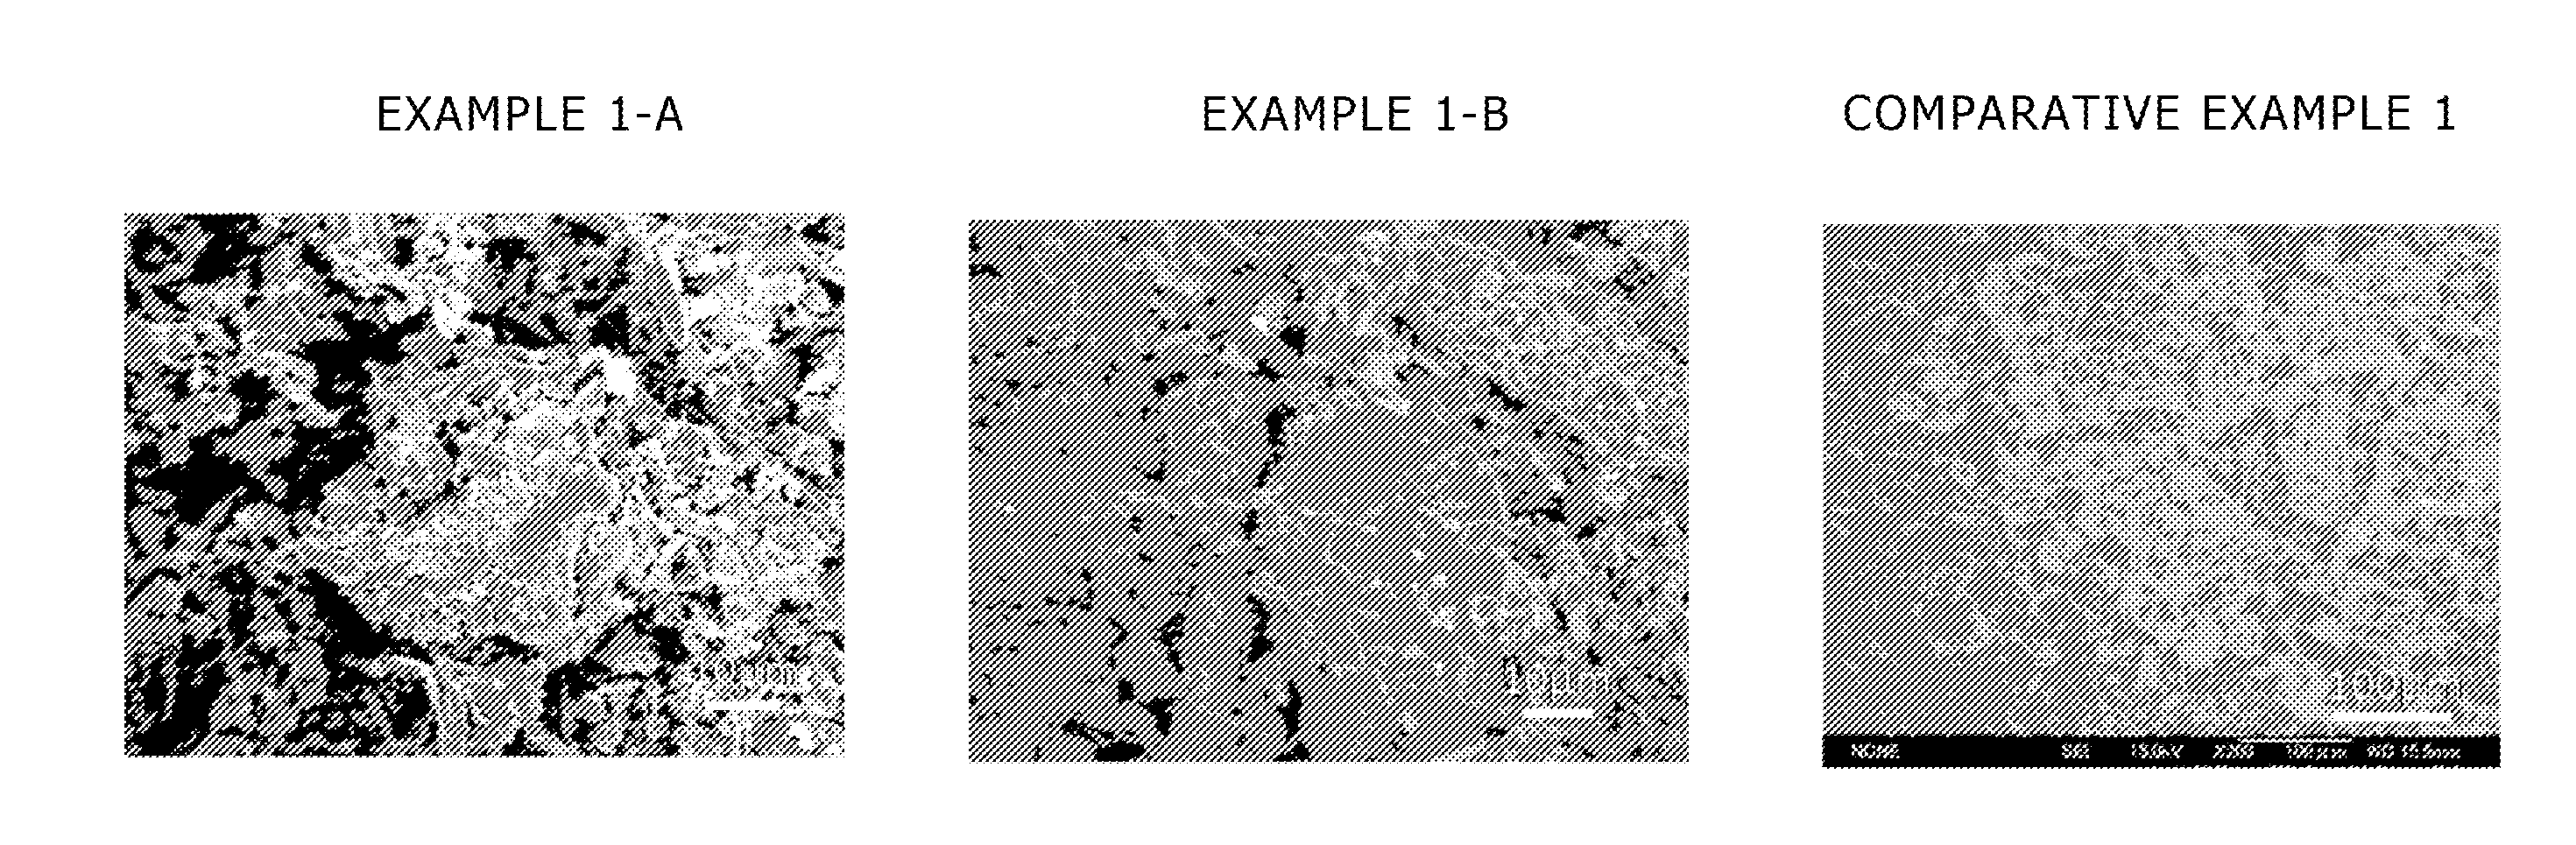 Fungicide, photo catalytic composite material, adsorbent, and depurative